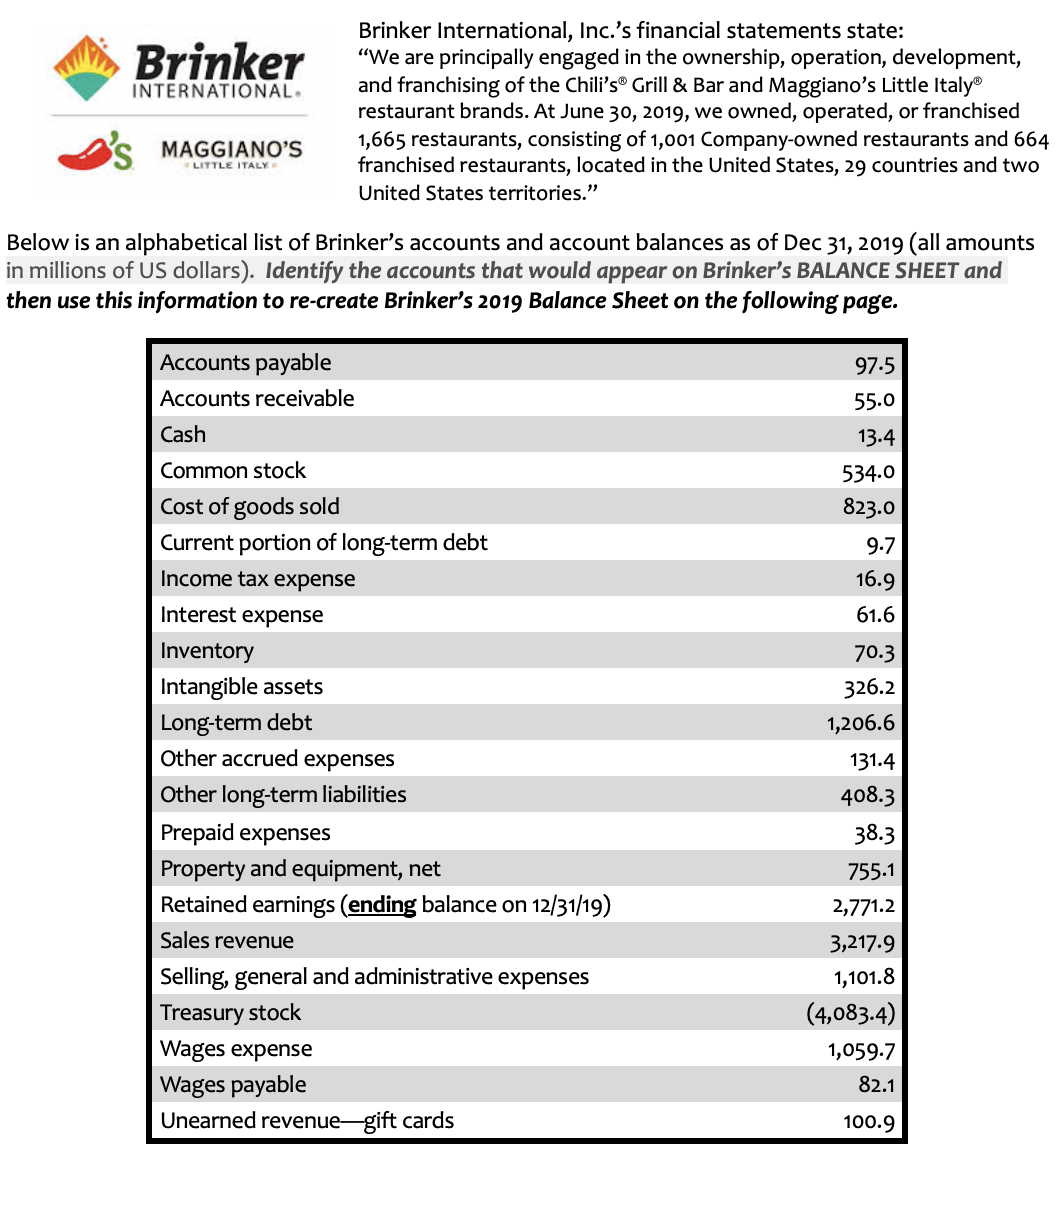 Brinker International, Inc.'s financial statements state:
"We are principally engaged in the ownership, operation, development,
and franchising of the Chili's® Grill & Bar and Maggiano's Little Italy
restaurant brands. At June 30, 2019, we owned, operated, or franchised
1,665 restaurants, consisting of 1,001 Company-owned restaurants and 664
franchised restaurants, located in the United States, 29 countries and two
Brinker
INTERNATIONAL.
MAGGIANO'S
LITTLE ITALY
United States territories."
Below is an alphabetical list of Brinker's accounts and account balances as of Dec 31, 2019 (all amounts
in millions of US dollars). Identify the accounts that would appear on Brinker's BALANCE SHEET and
then use this information to re-create Brinker's 2019 Balance Sheet on the following page.
Accounts payable
97.5
Accounts receivable
55.0
Cash
13.4
Common stock
534.0
Cost of goods sold
823.0
Current portion of long-term debt
9.7
Income tax expense
16.9
Interest expense
61.6
Inventory
70.3
Intangible assets
326.2
Long-term debt
Other accrued expenses
1,206.6
131.4
Other long-term liabilities
408.3
Prepaid expenses
38.3
Property and equipment, net
755.1
Retained earnings (ending balance on 12/31/19)
2,771.2
Sales revenue
3,217.9
Selling, general and administrative expenses
1,101.8
Treasury stock
(4,083.4)
Wages expense
1,059.7
Wages payable
82.1
Unearned revenuegift cards
100.9
